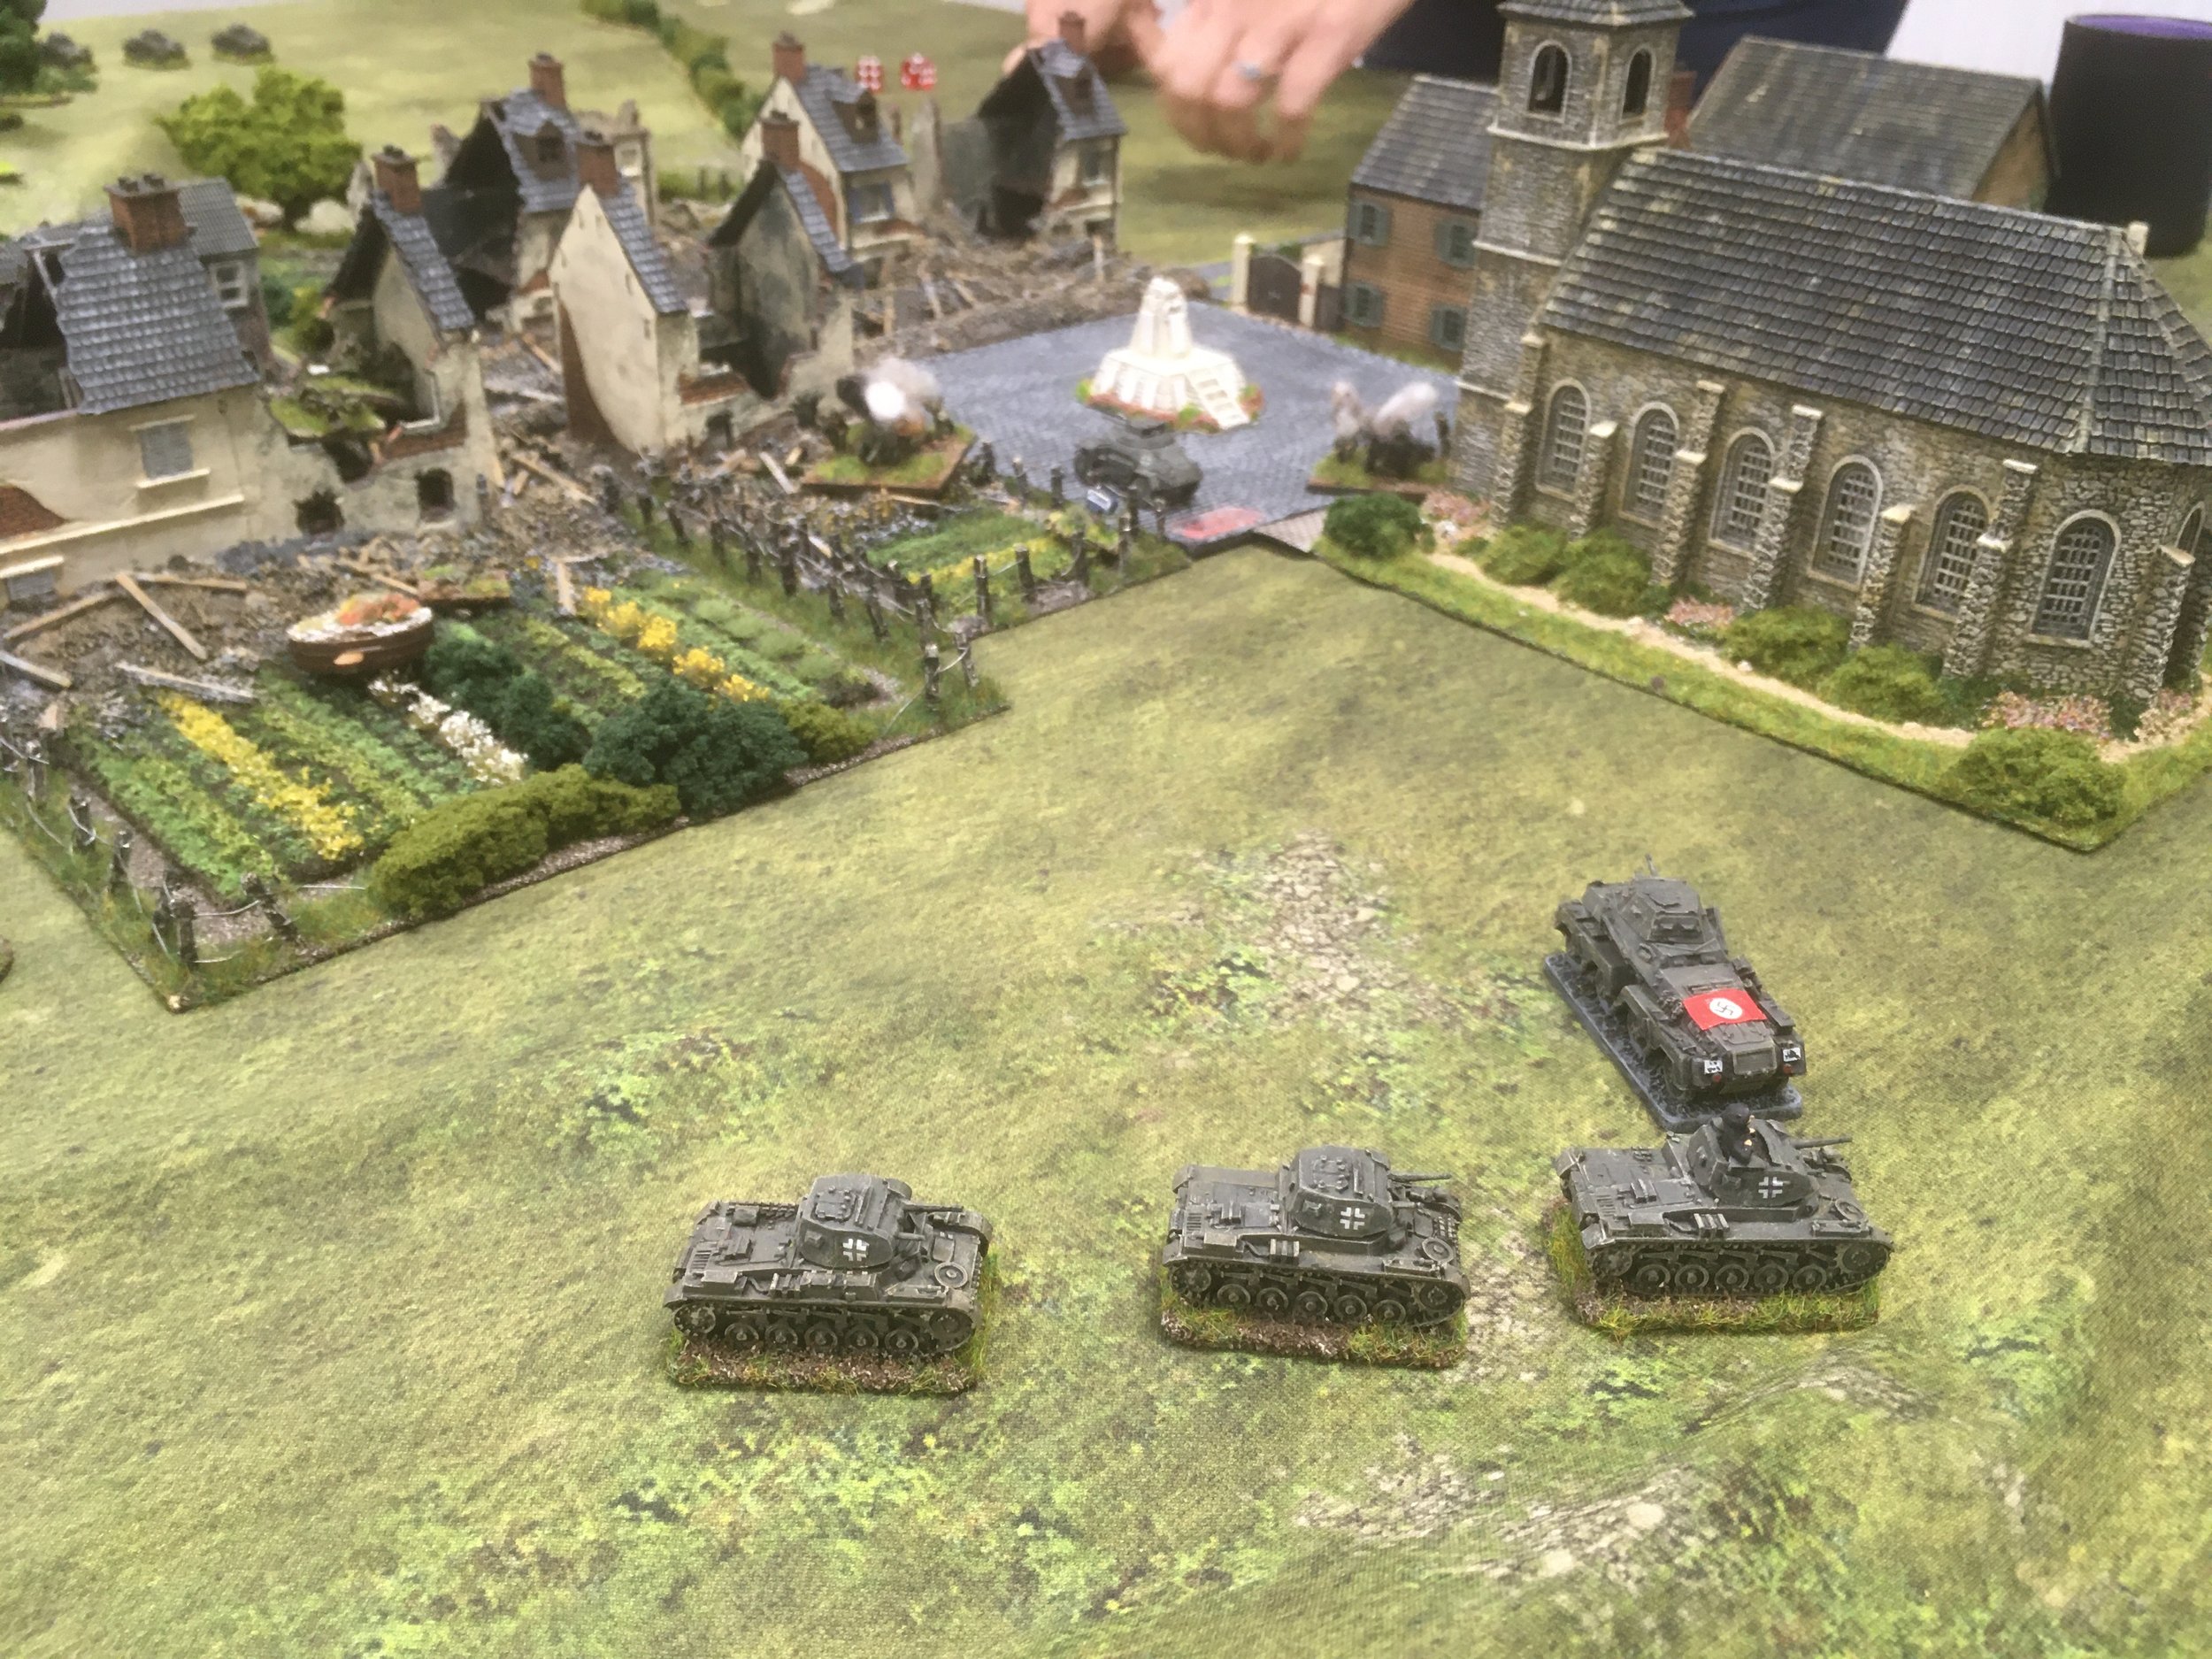 Meanwhile, as the sun begins to set, the Panzer II's sweep around the village passing the Sd.Kfz 231. 